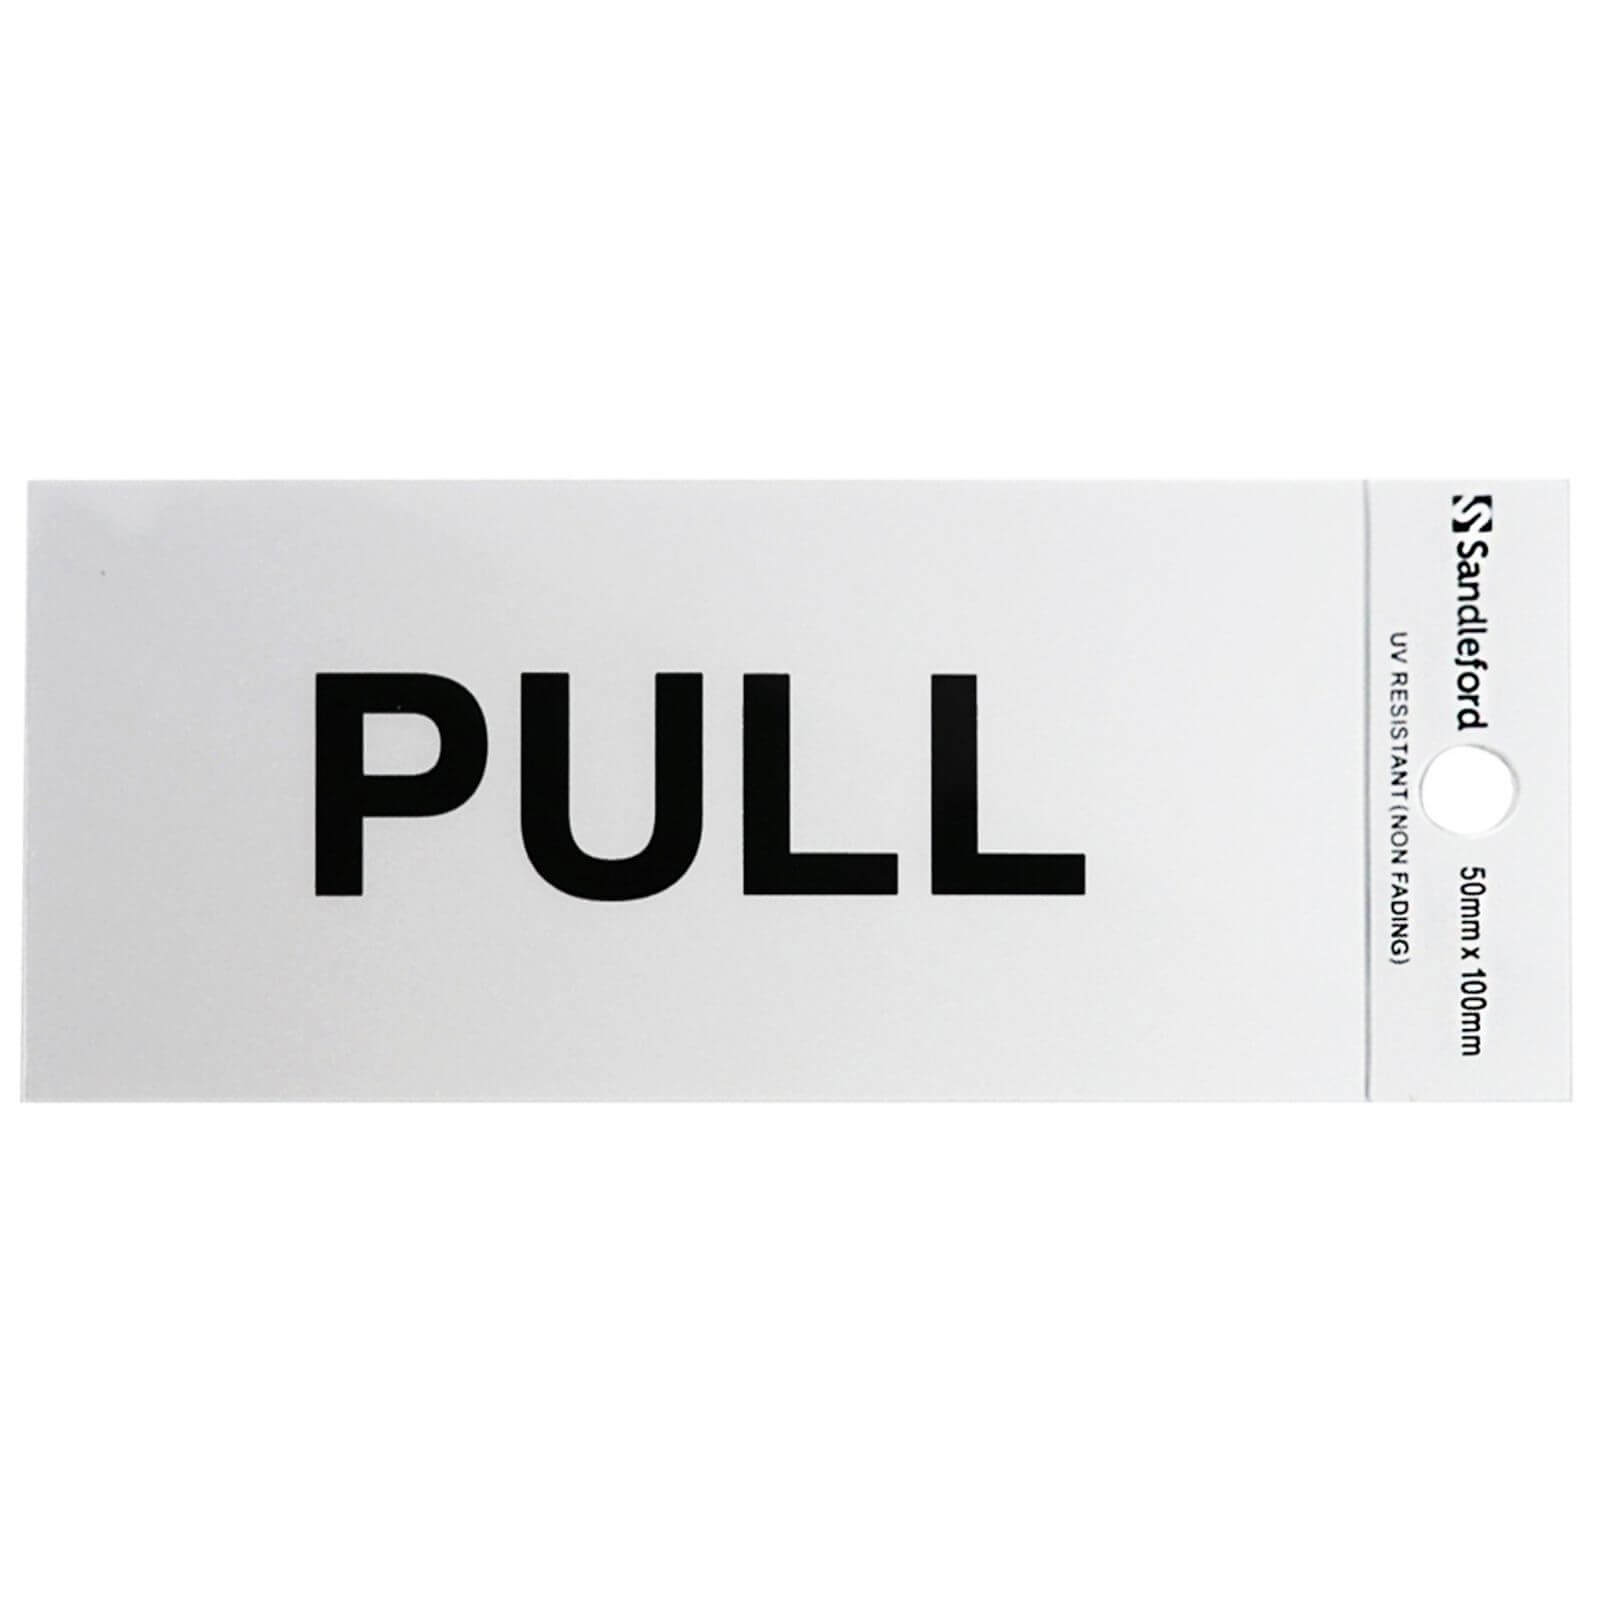 Self Adhesive Pull Sign - 100 x 50mm